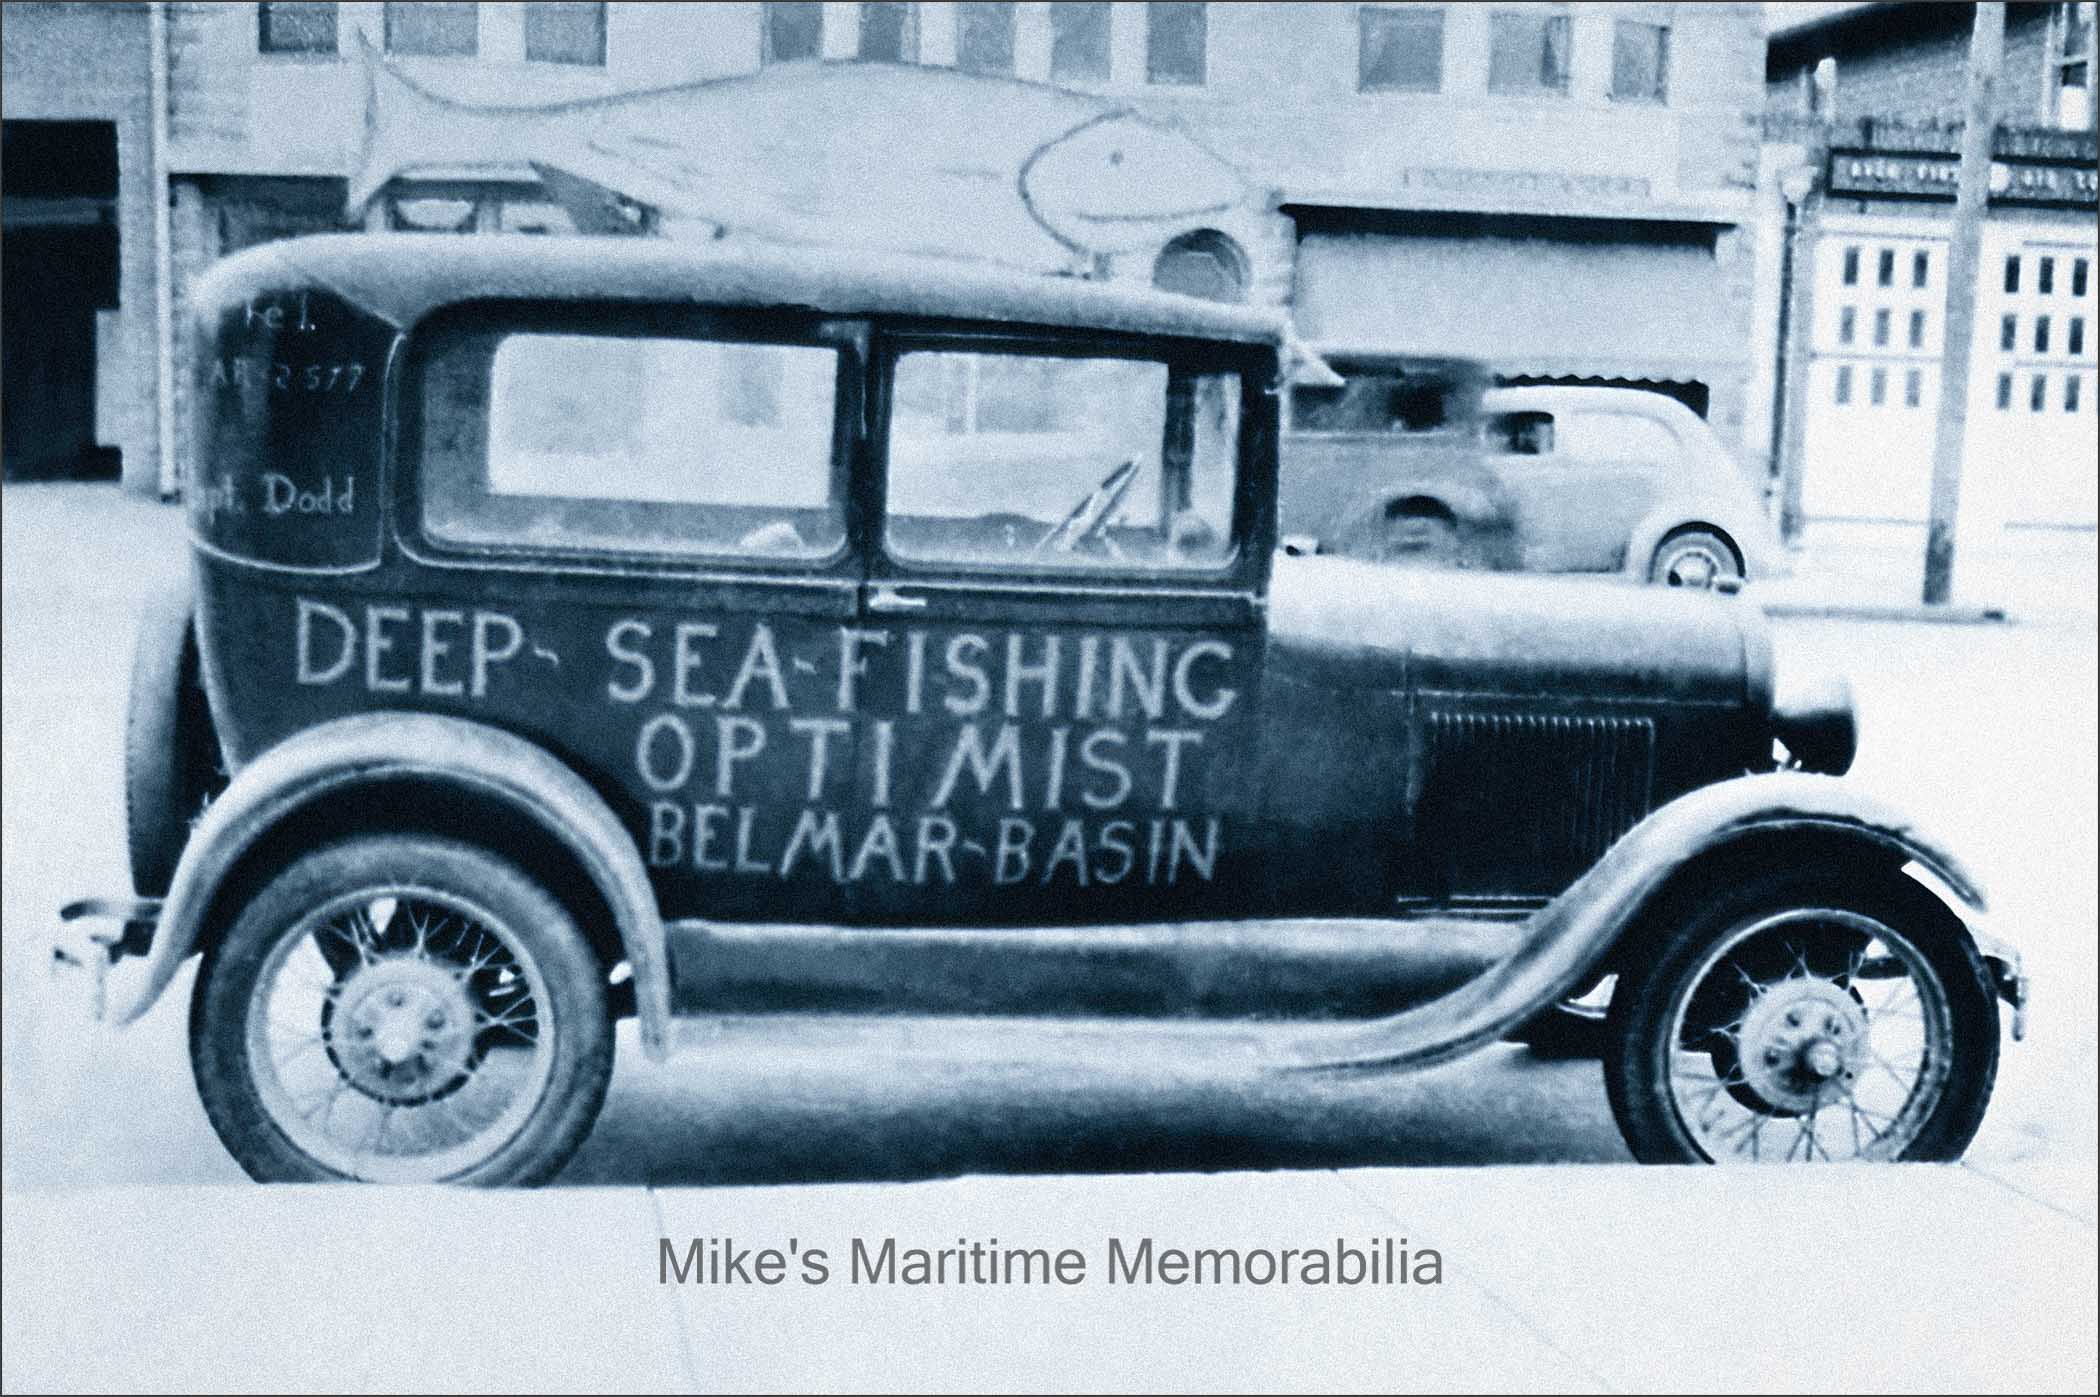 OPTIMIST MODEL A FORD, Belmar, NJ – 1940 Captain Charlie Dodd used to drive around with this Model A Ford with the fish on top as a neat way to advertise his boat, the "OPTIMIST", from Belmar, NJ. The photo was taken in 1940 when Captain Dodd operated only one boat; he added the "OPTIMIST II" in 1941 and the "OPTIMIST III" in 1942. The photo is courtesy of Captain John Bogan Jr.